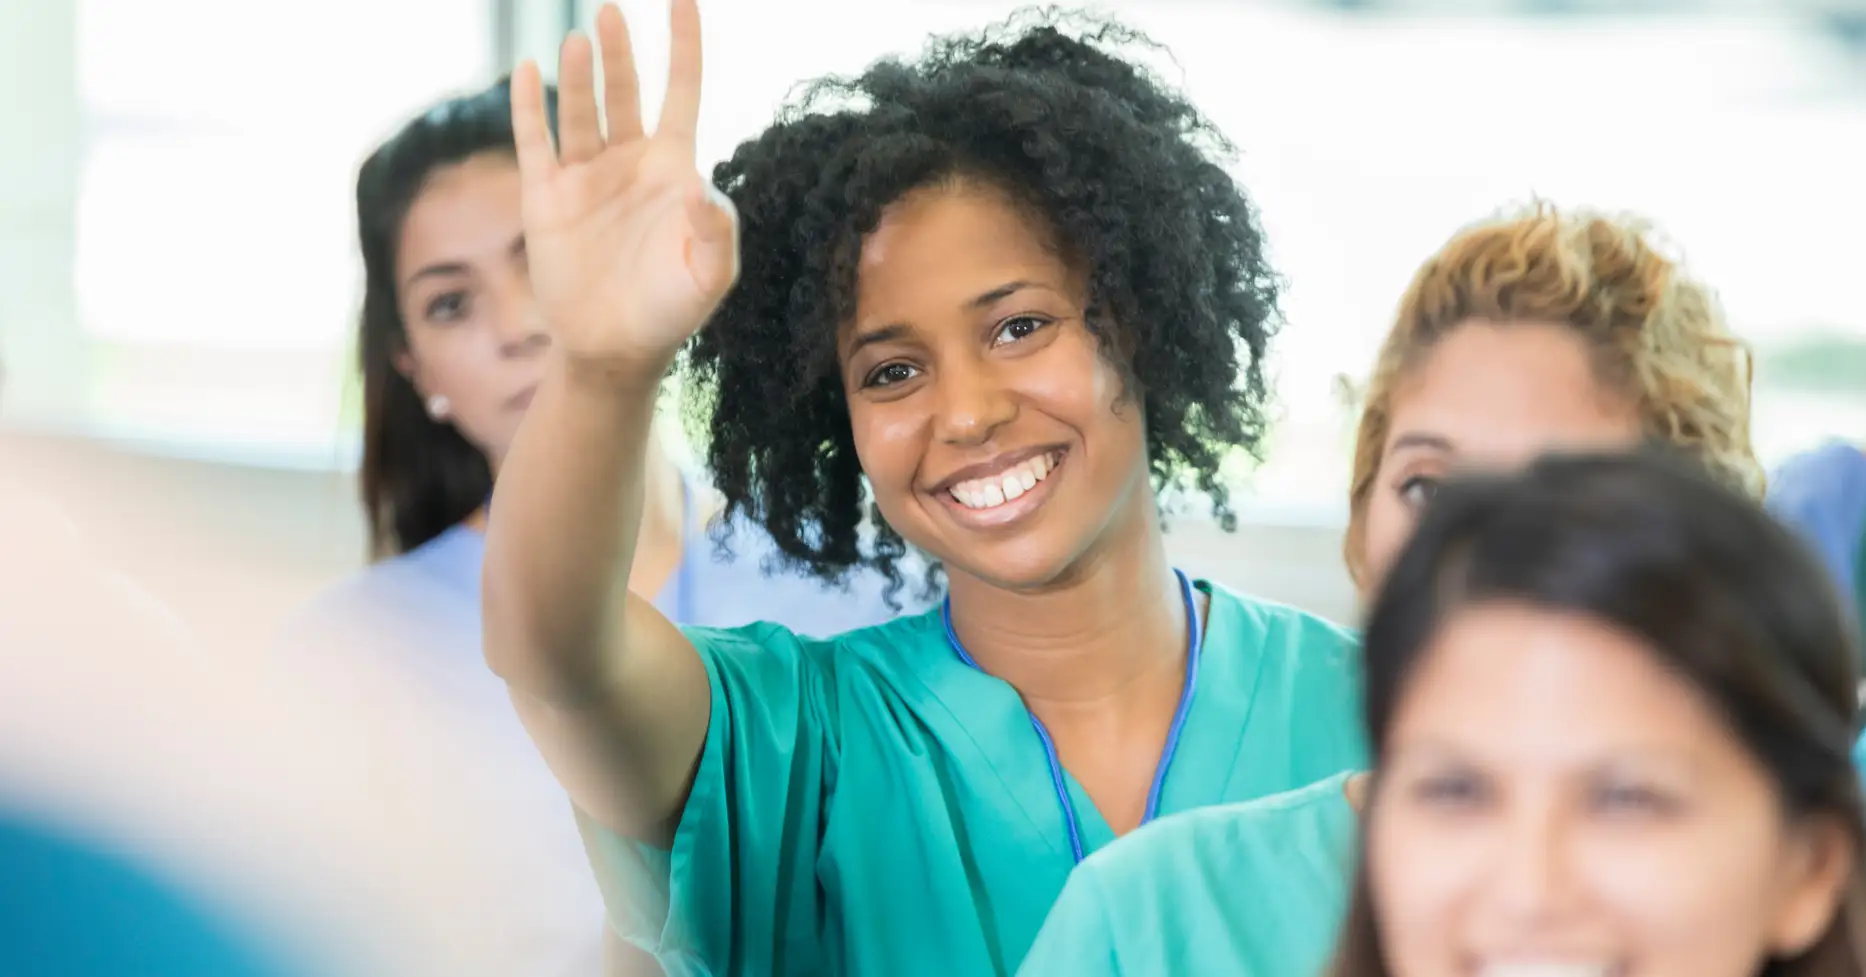 Nurse in class raising hand to ask question